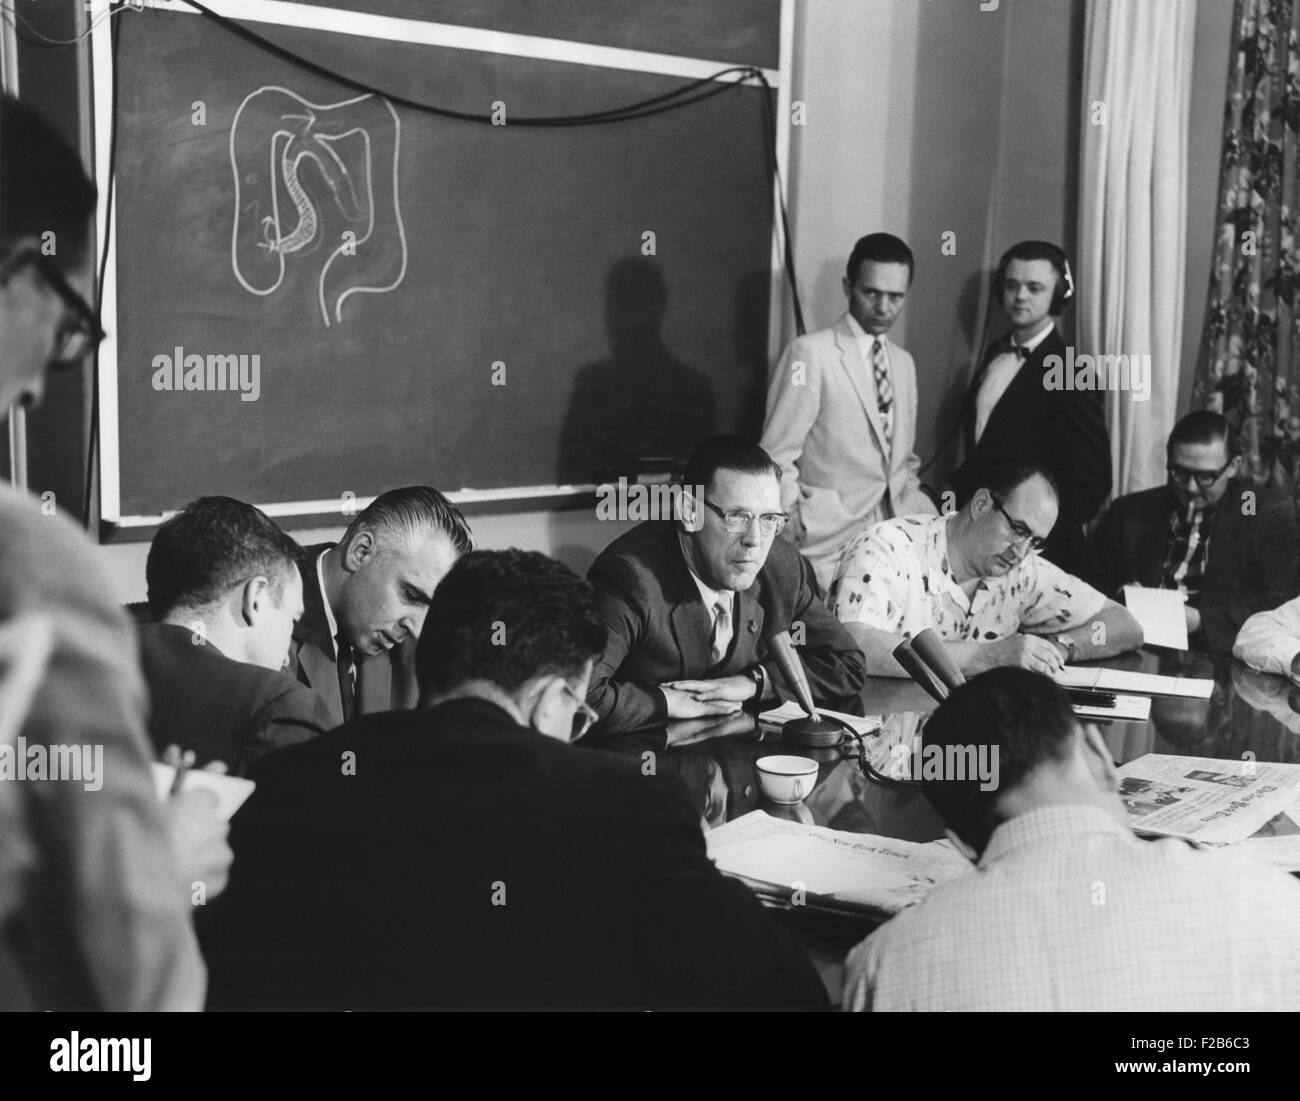 President Eisenhower 's doctors brief the press on his intestinal surgery. June 10, 1956. Eisenhower had a 2 hour operation, described as intestinal surgery, bypassing an obstruction in the ileum. - (BSLOC 2014 16 120) Stock Photo